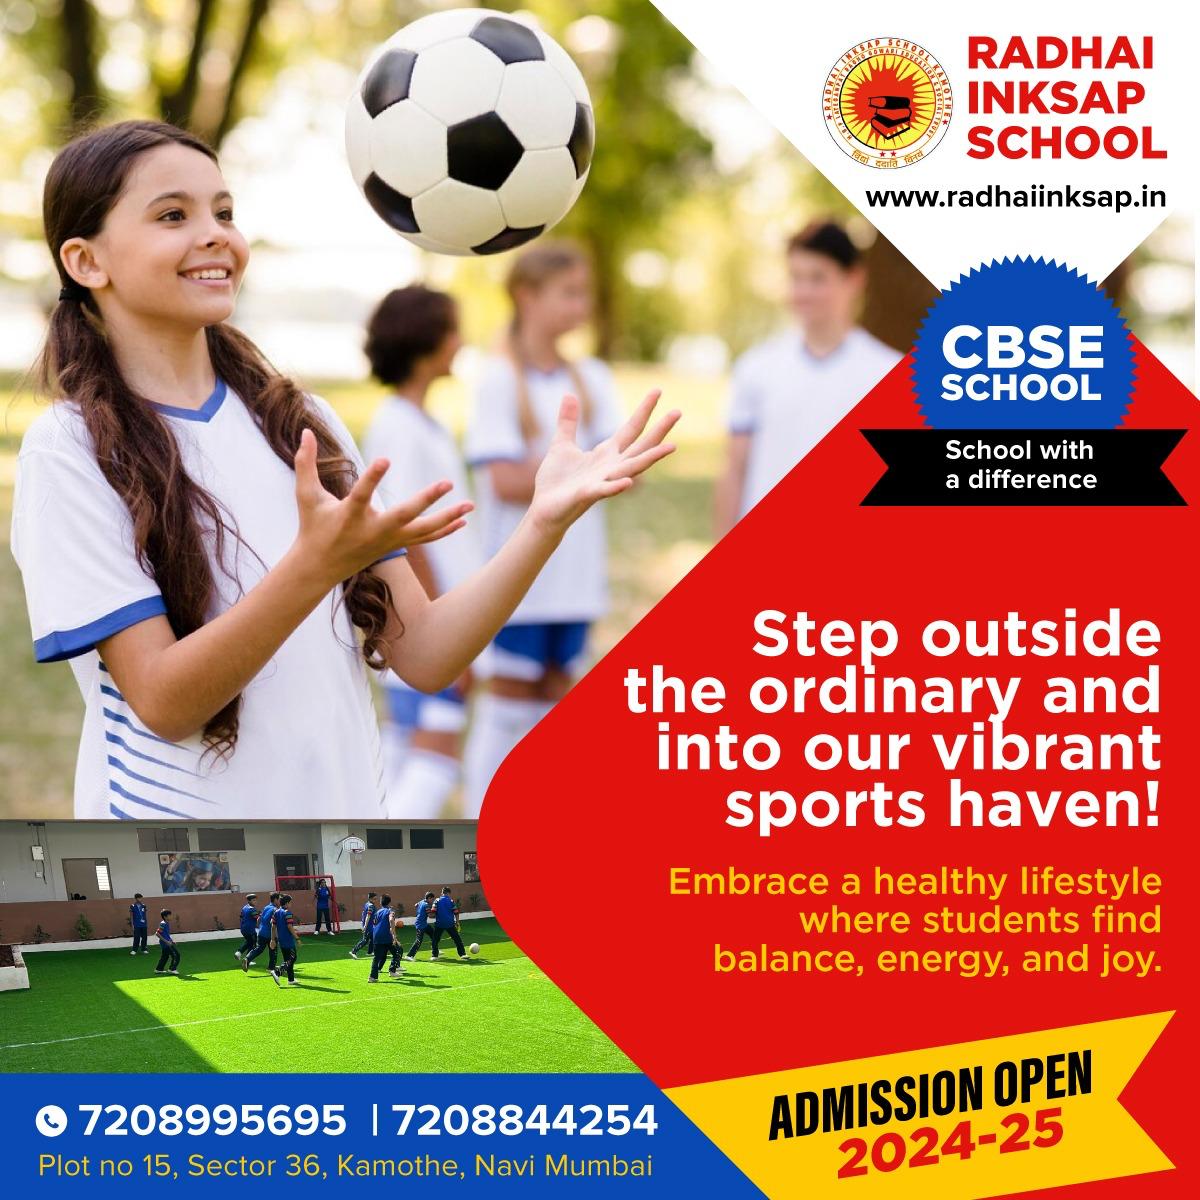 Elevate your campus experience with our lush sports complex! 
For more details contact us on-72088 44254 also visit- radhaiinksap.in
#RadhaiInksapSchool #NurturingPotential #AdmissionsOpen #FutureLeaders #RadhaiInksap #Admissions2024 #HolisticEducation